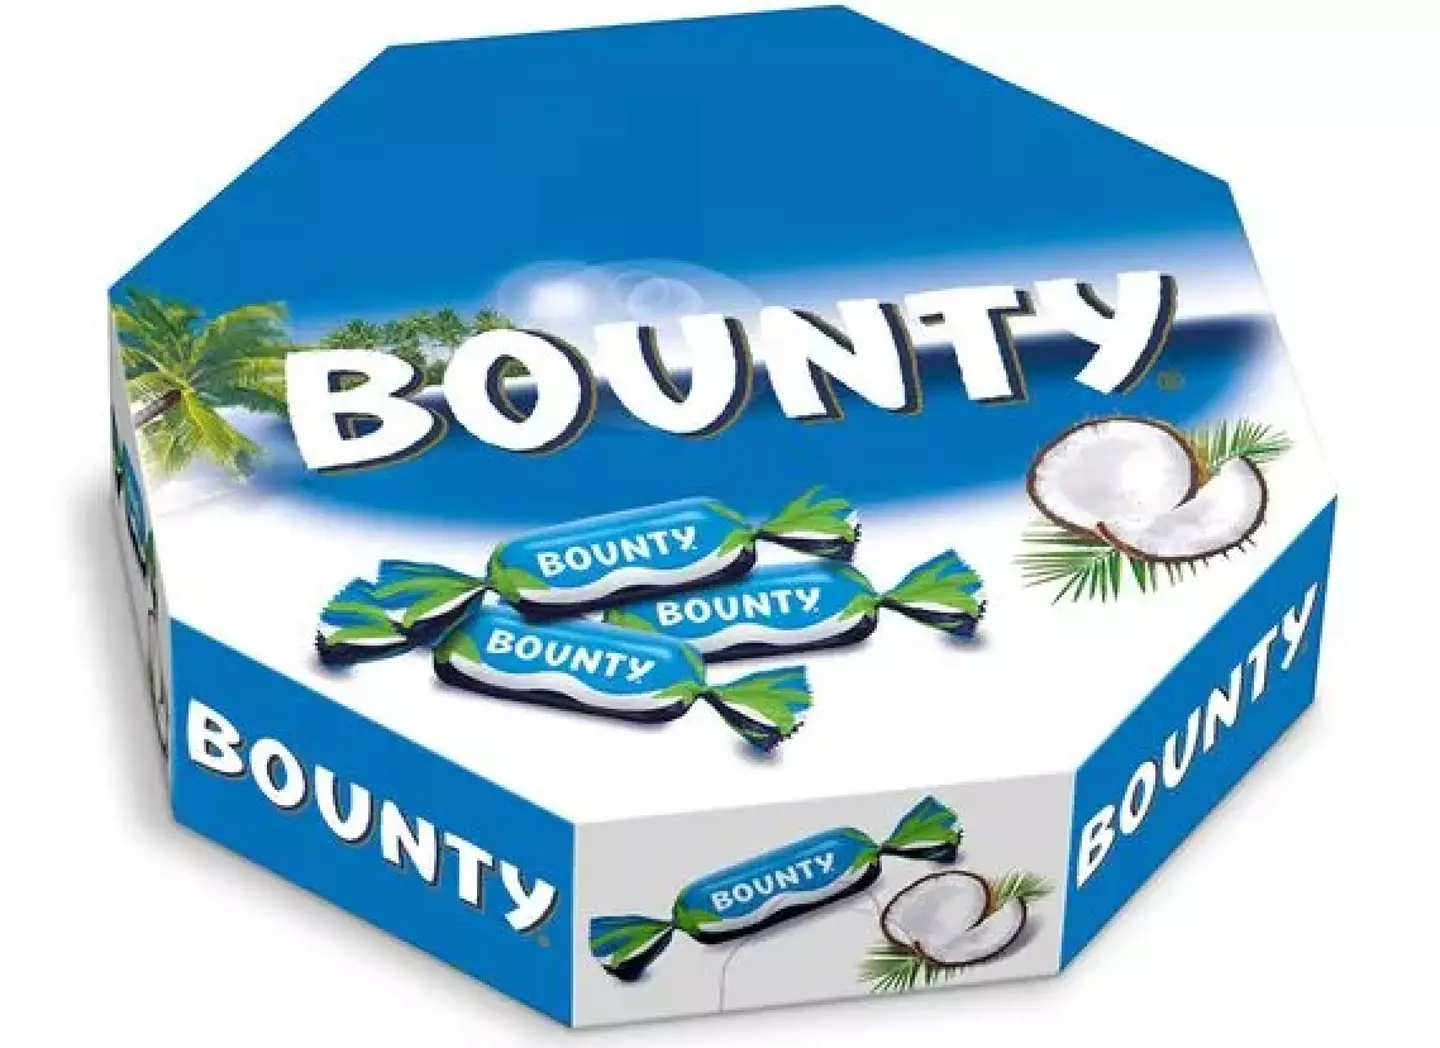 The box is stuffed to the brim with Bountys.